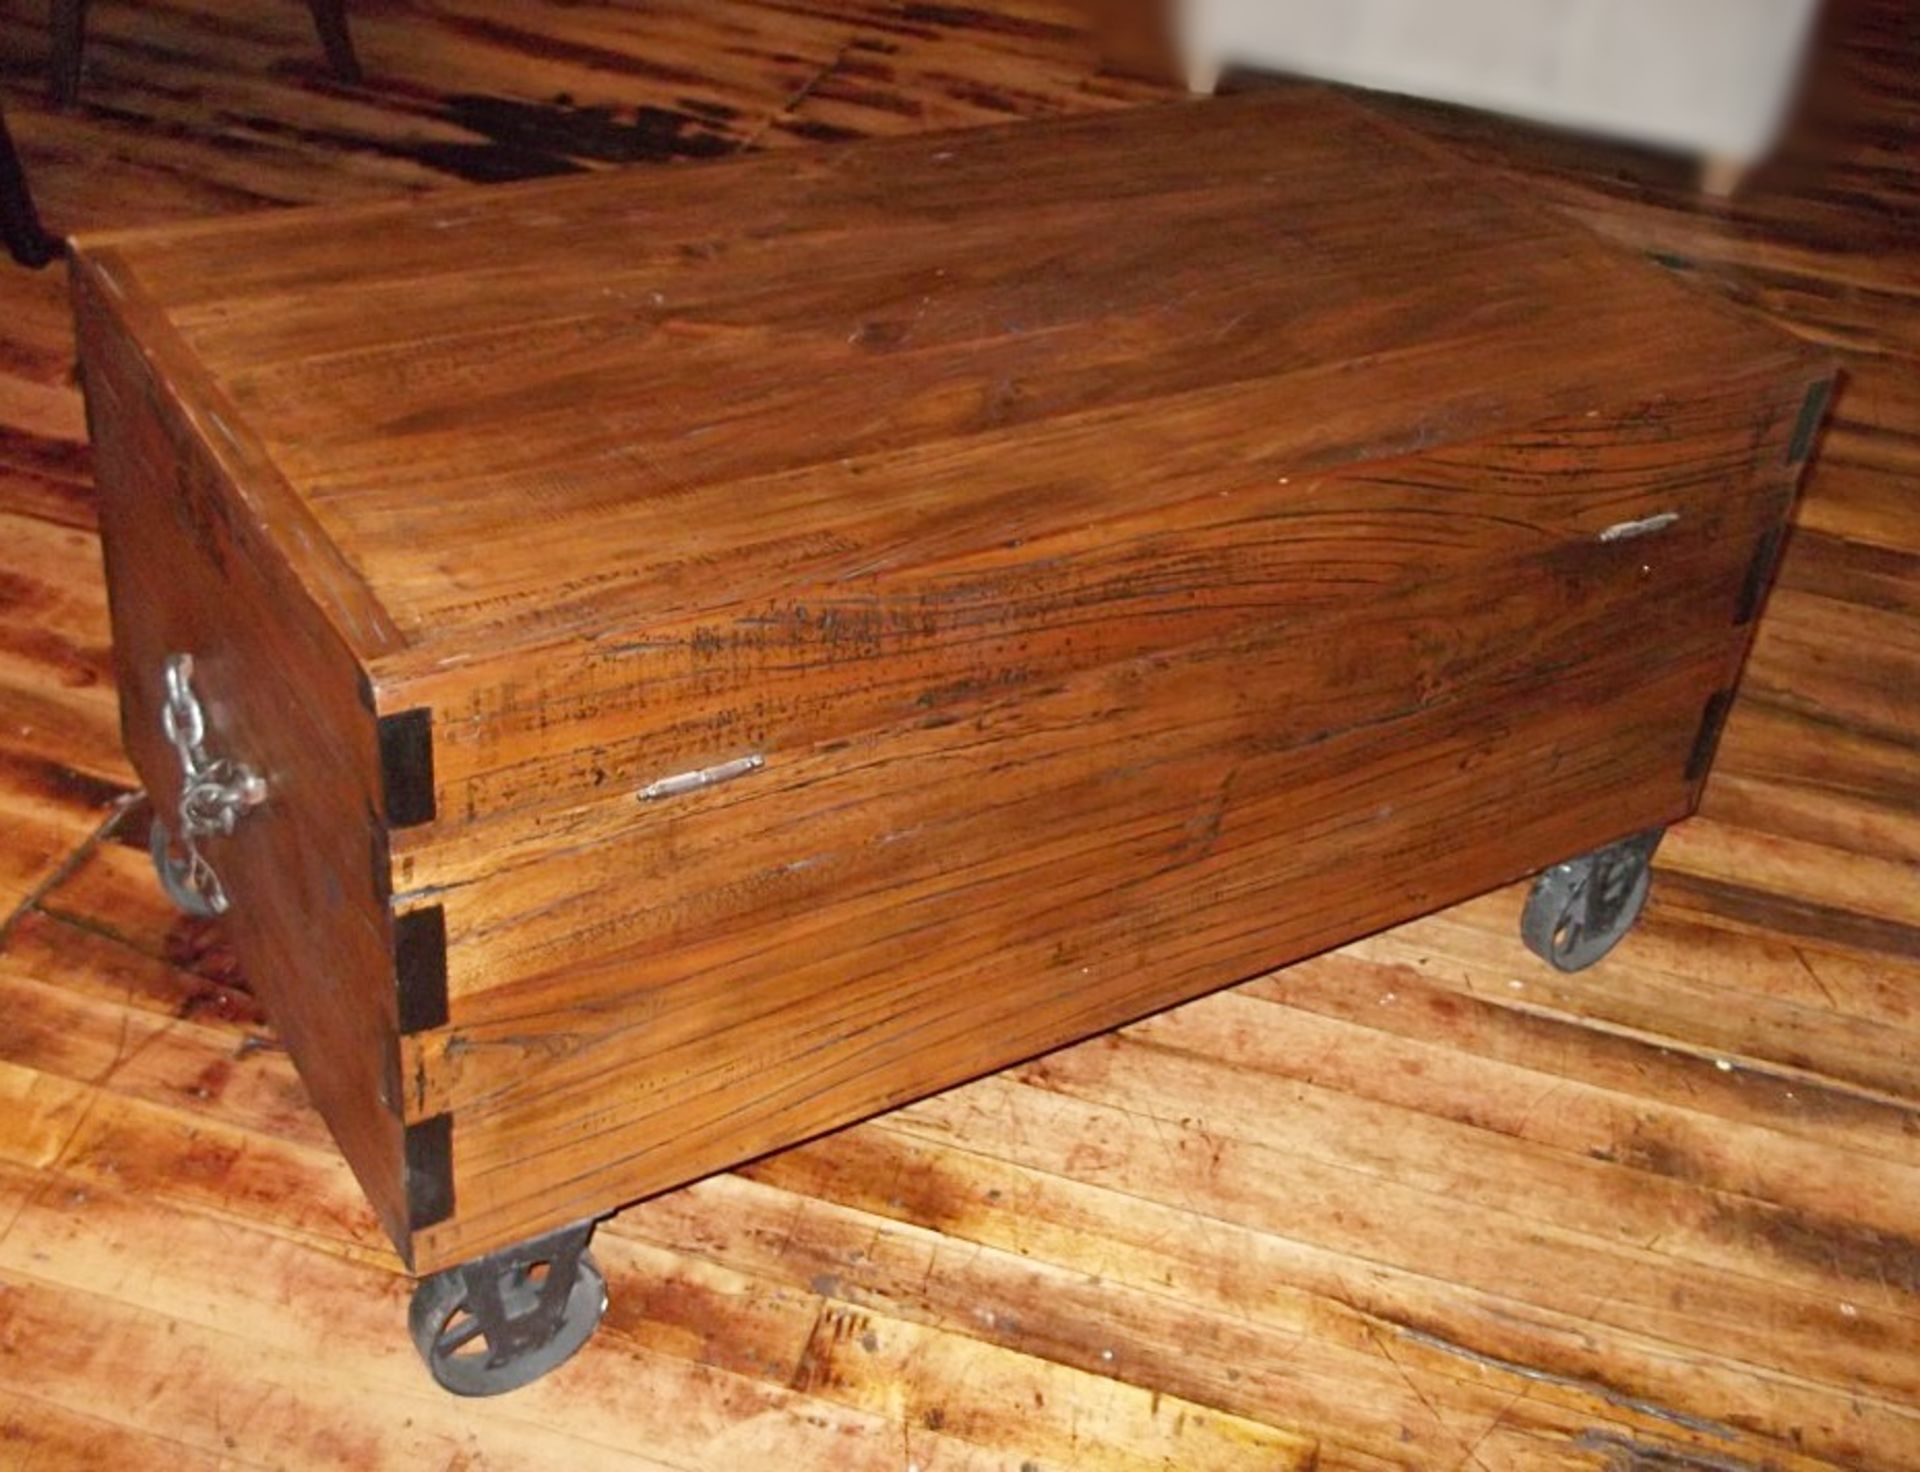 1 x Handcrafted Solid Wood Trunk Coffee Table / Storage Chest - Features Chain Handles & Metal - Image 4 of 5